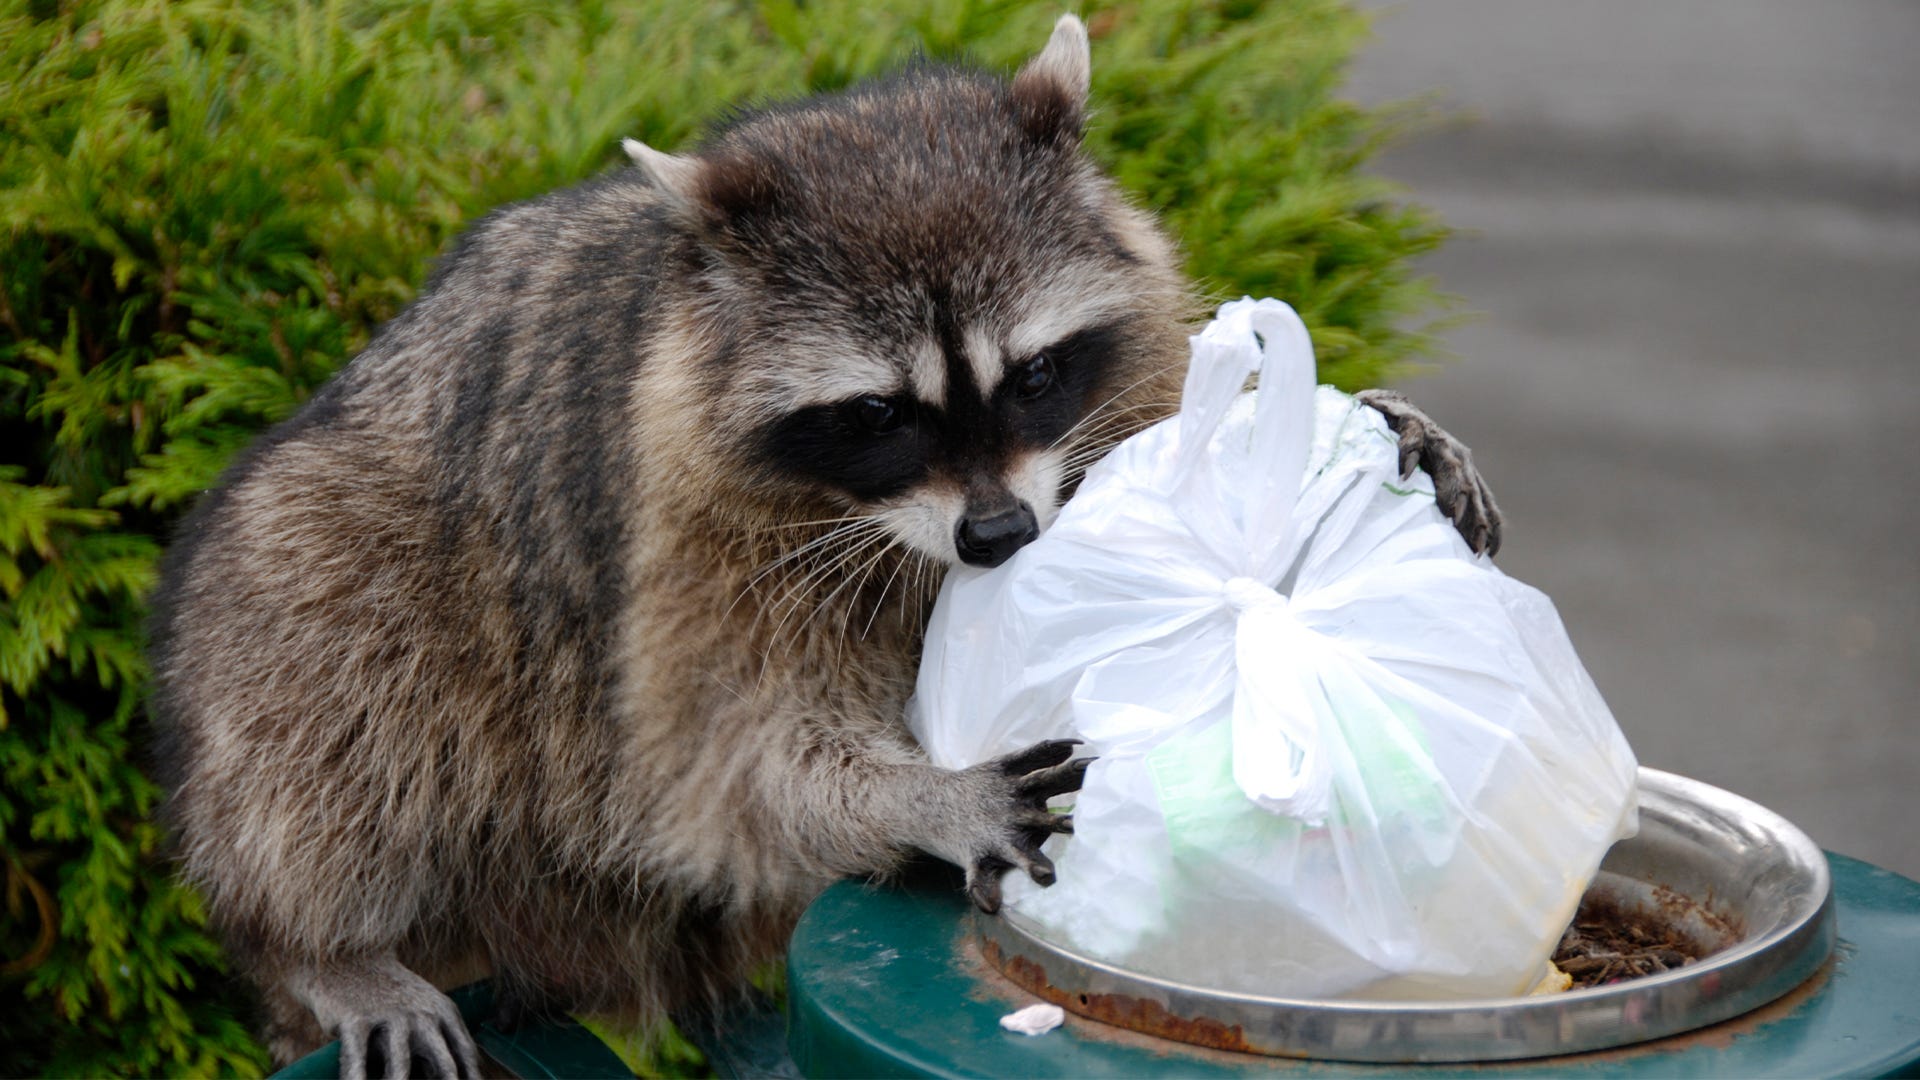 How-to-Keep-Raccoons-out-of-my-trash.jpg